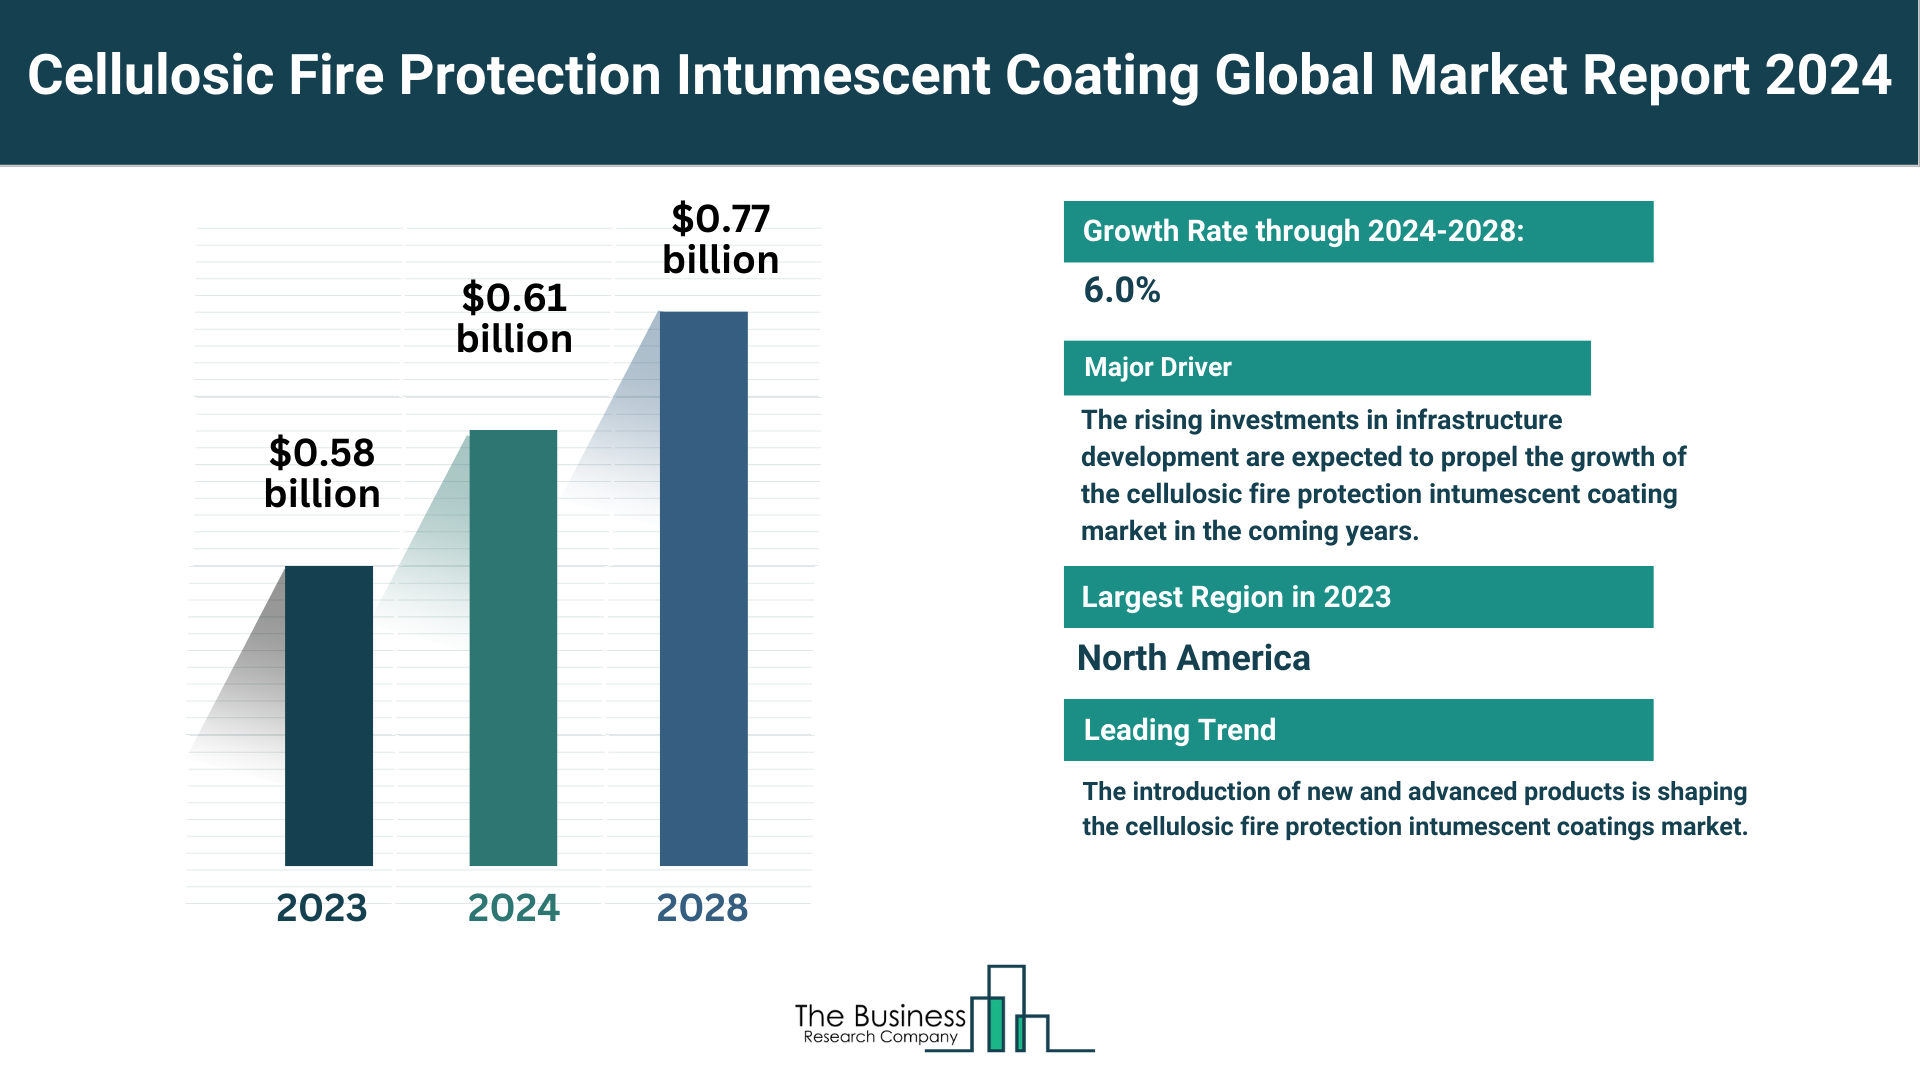 5 Key Takeaways From The Cellulosic Fire Protection Intumescent Coating Market Report 2024